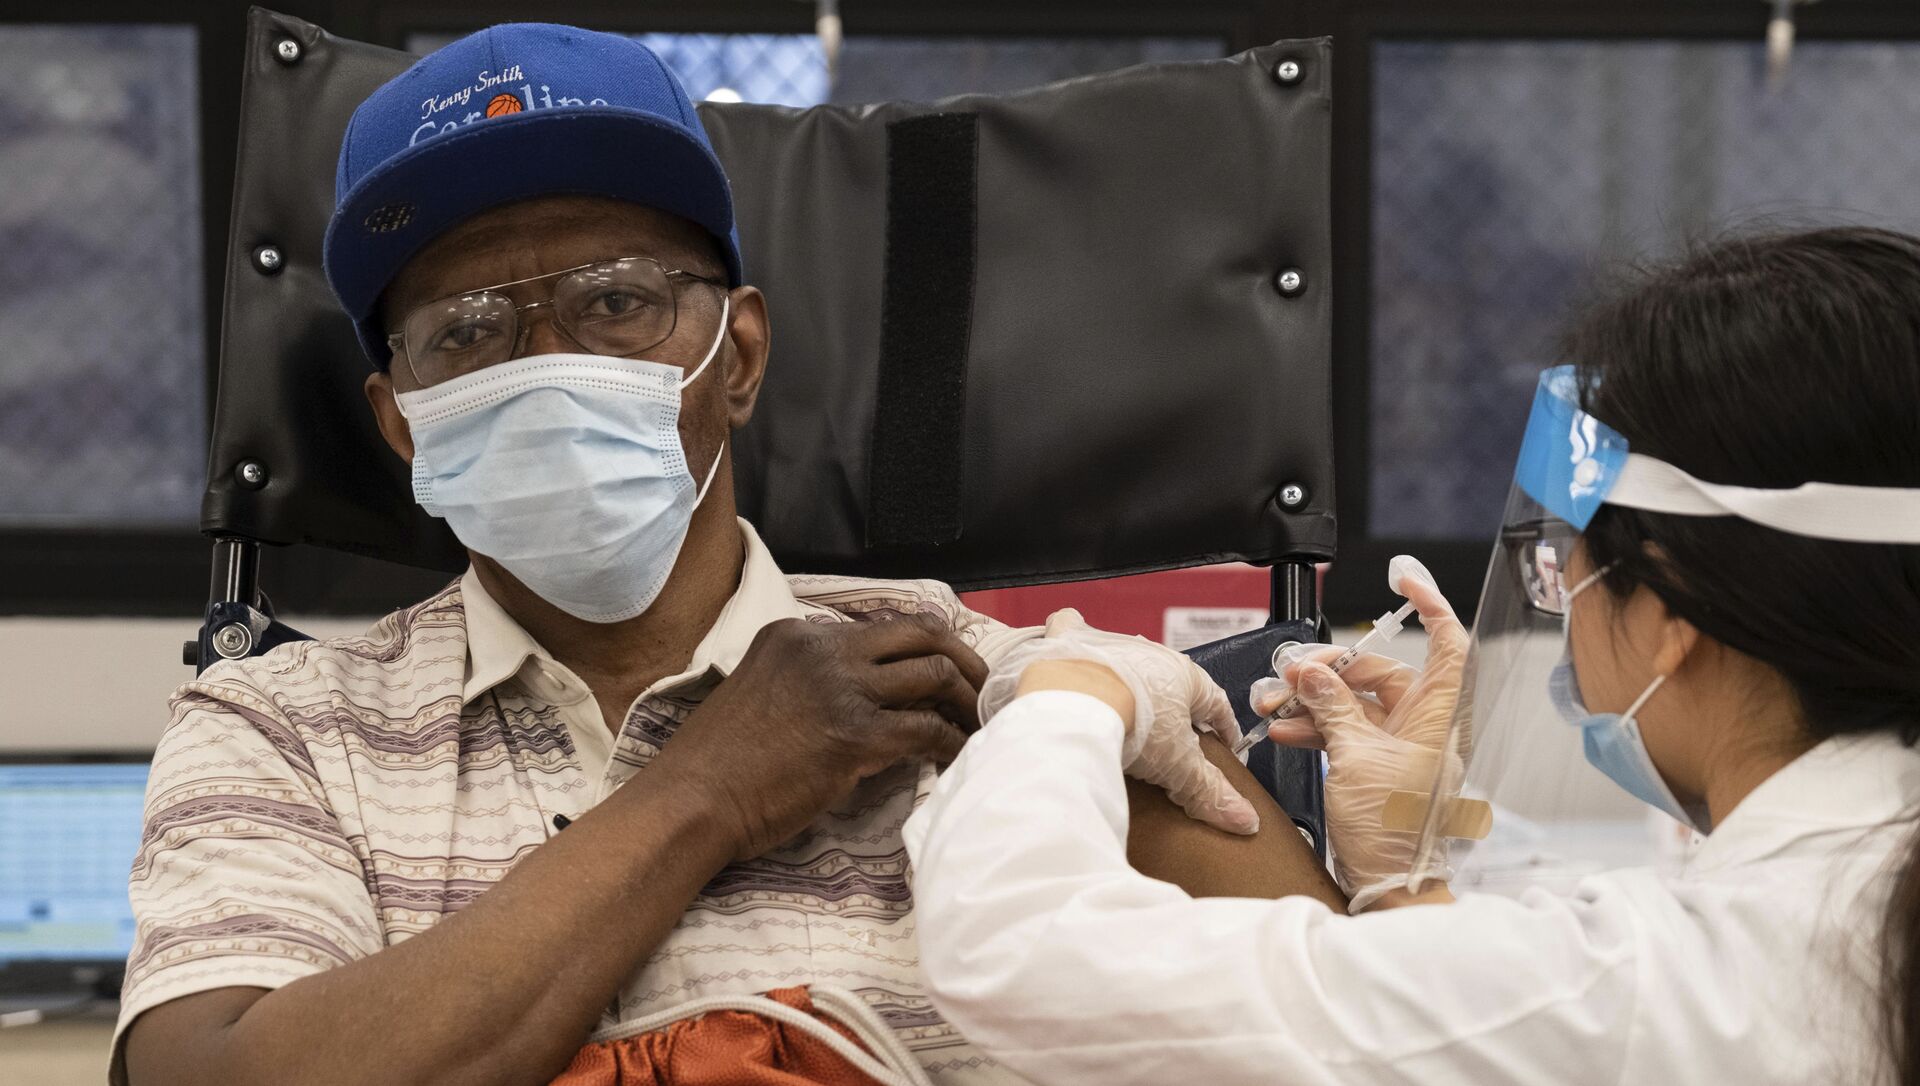  In this Jan. 15, 2021, file photo, a nursing home resident receives the COVID-19 vaccine by a CVS Pharmacist at Harlem Center for Nursing and Rehabilitation, a nursing home facility in Harlem neighborhood of New York.  - 俄罗斯卫星通讯社, 1920, 14.02.2021